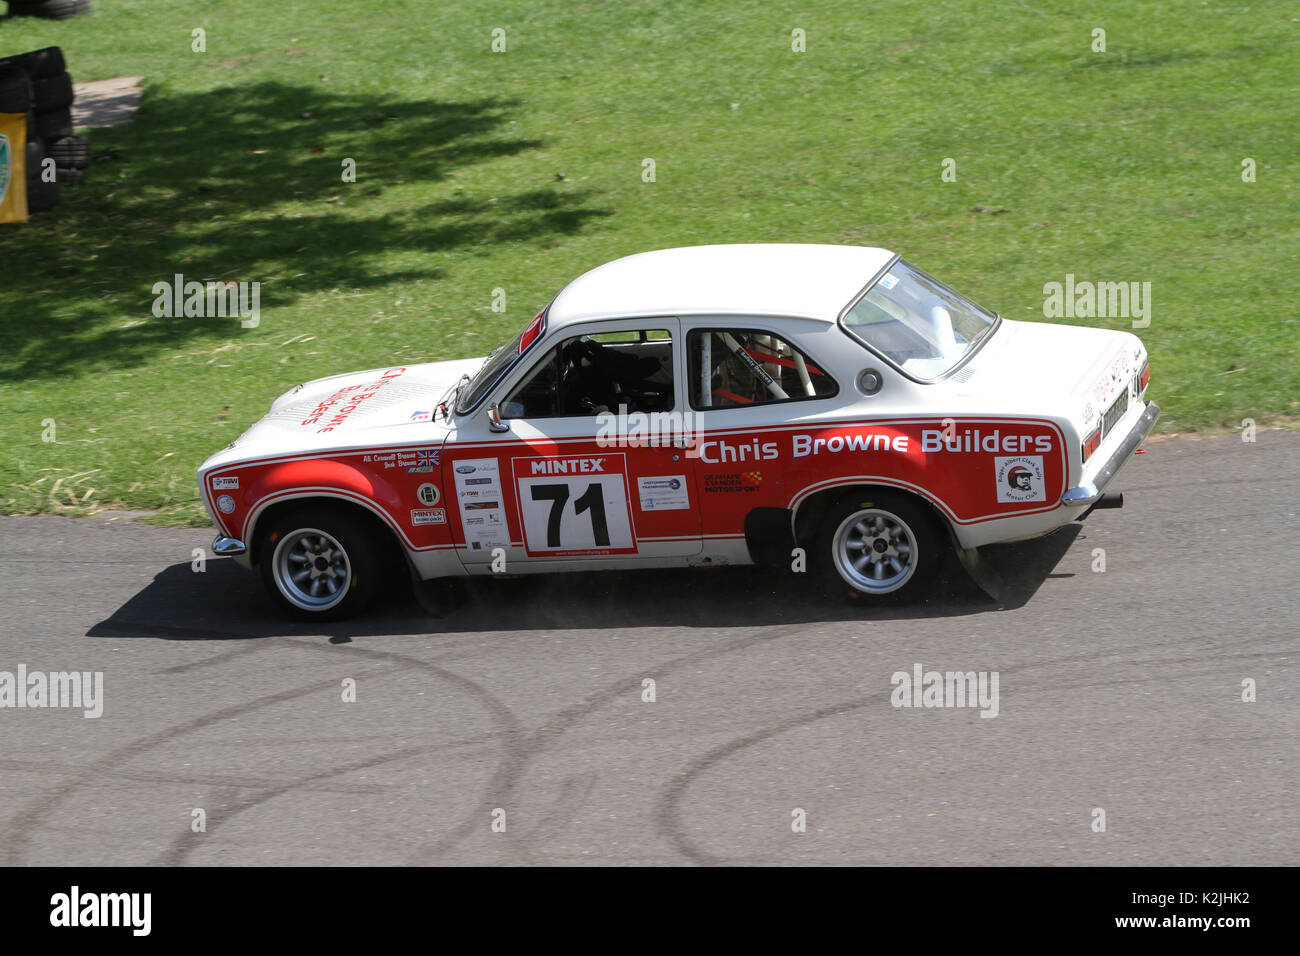 1968 Ford Escort RS 1600 Mk1 competing in the time trials at Motorsport at the Palace in South London England 27 08 2017 Stock Photo